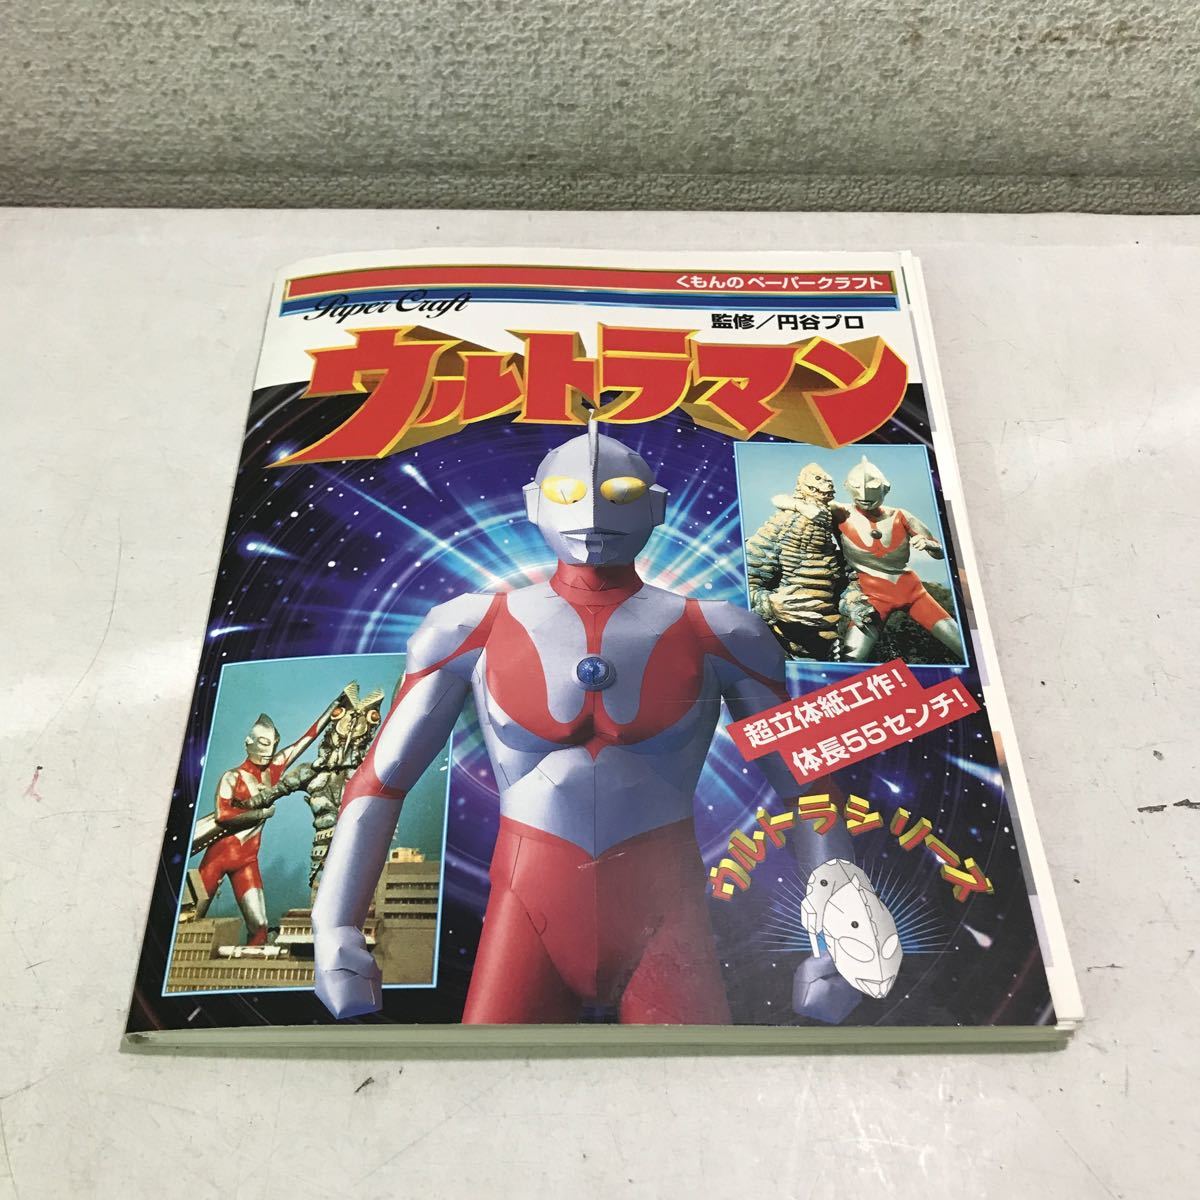 T02*.... paper craft Ultraman ../ jpy . production 1997 year 5 month issue ... publish *240221